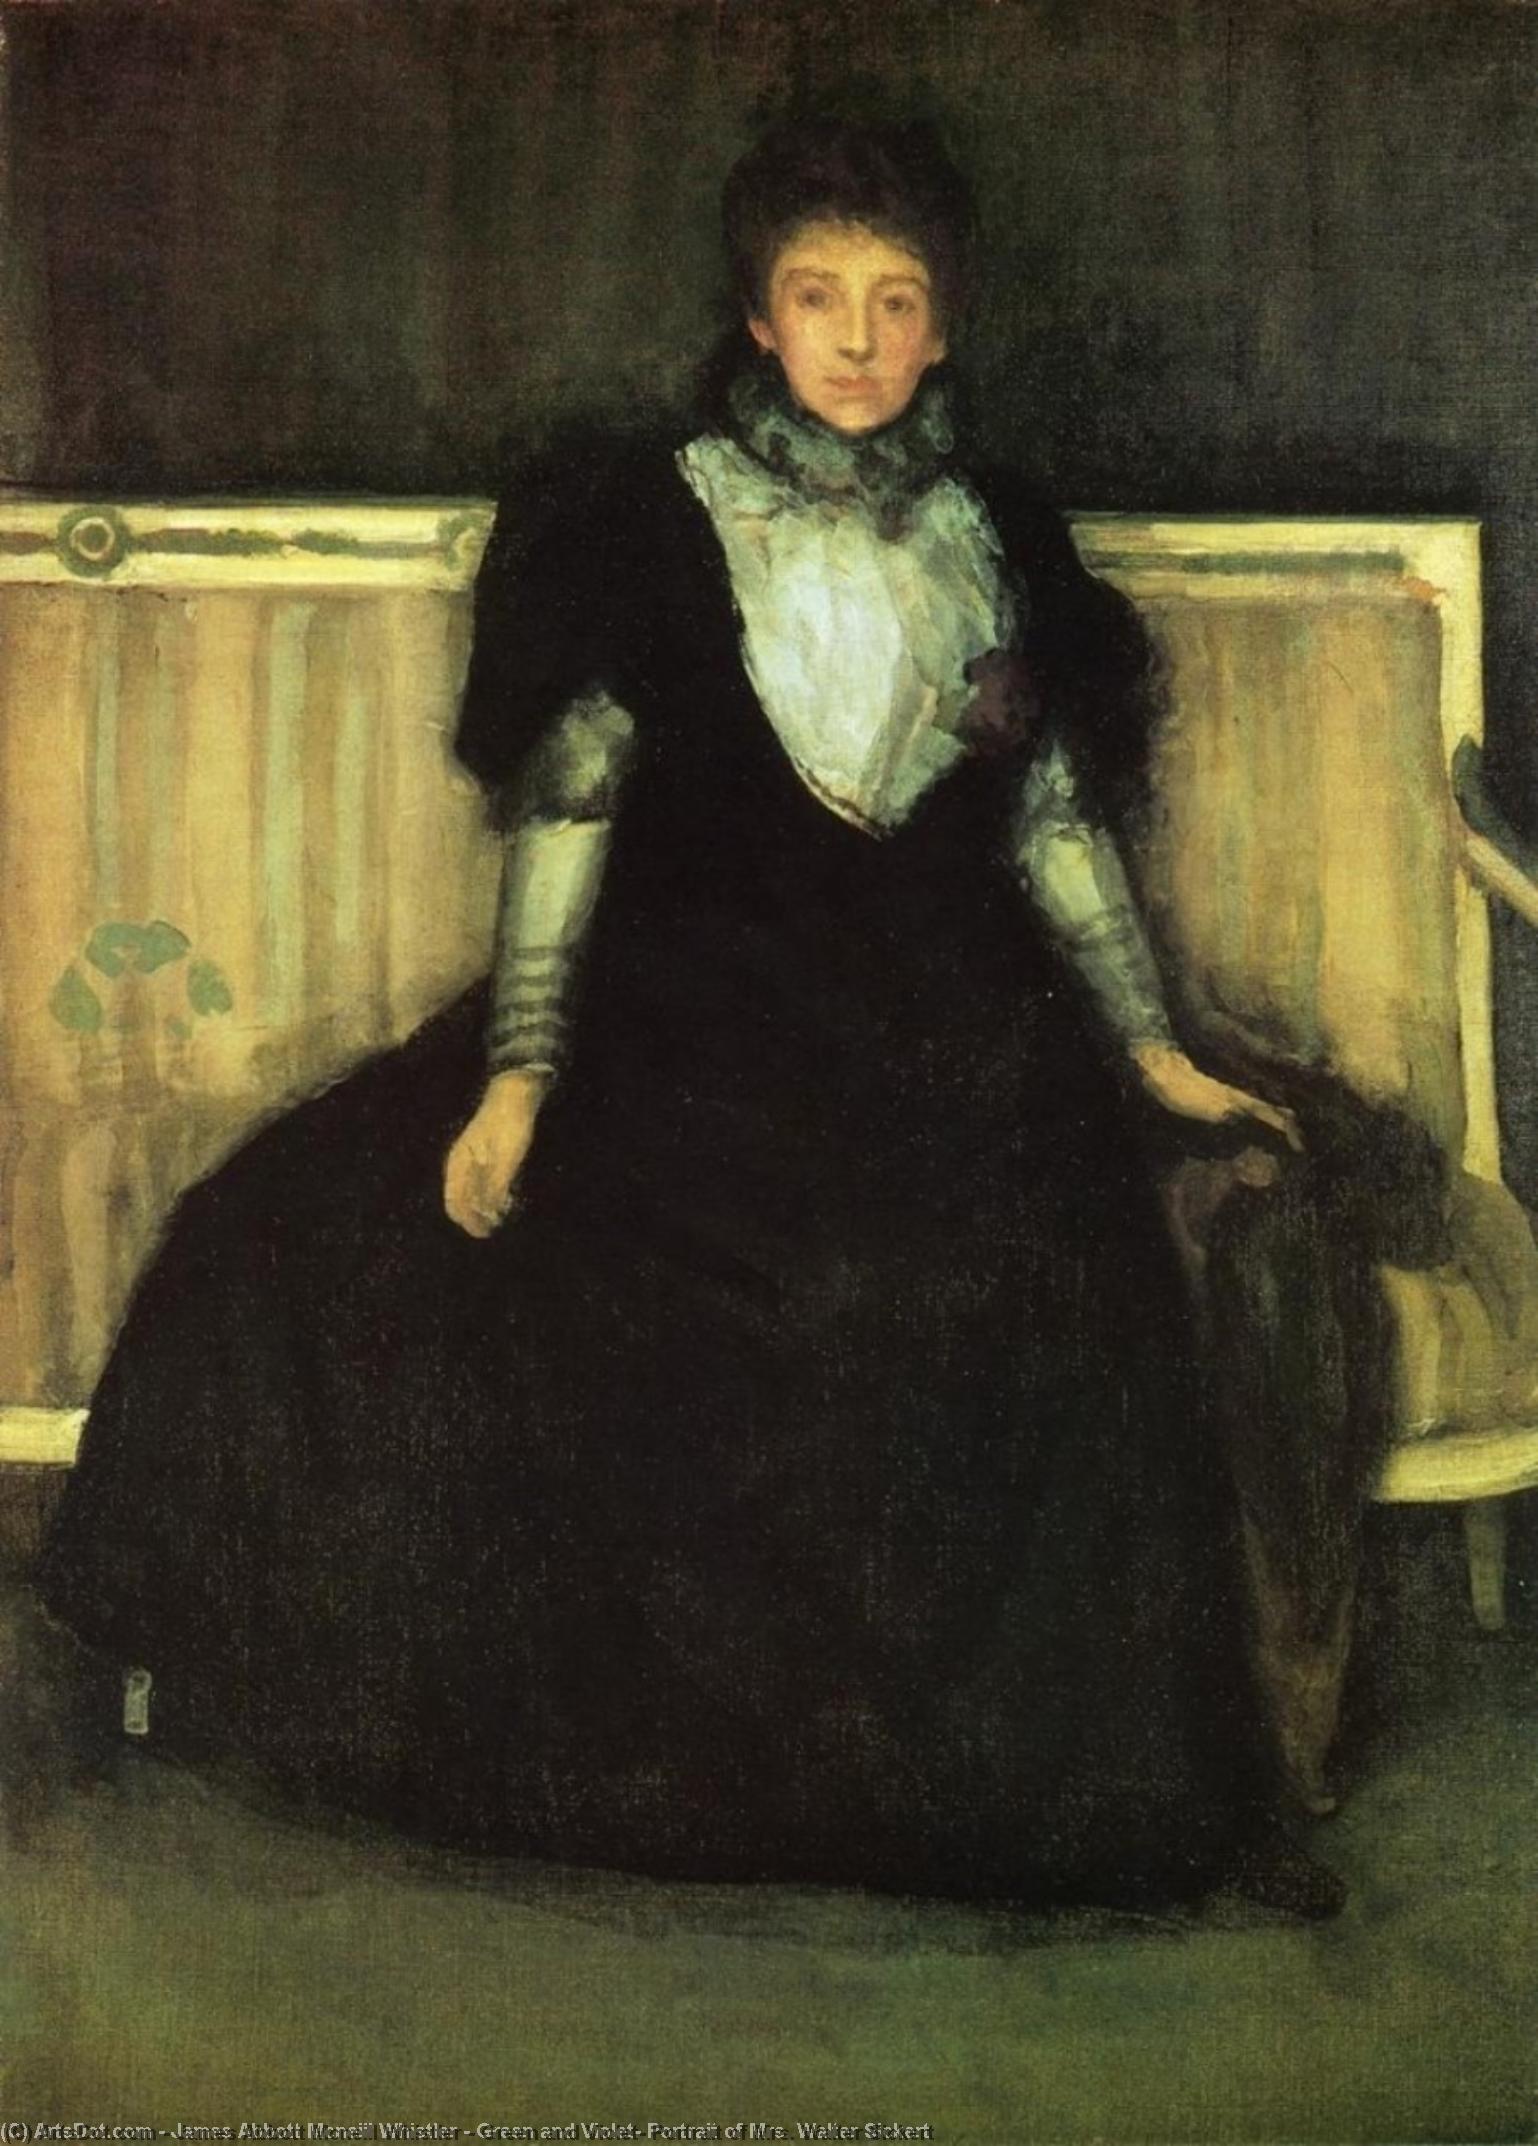 Order Paintings Reproductions Green and Violet: Portrait of Mrs. Walter Sickert, 1885 by James Abbott Mcneill Whistler (1834-1903, United States) | ArtsDot.com